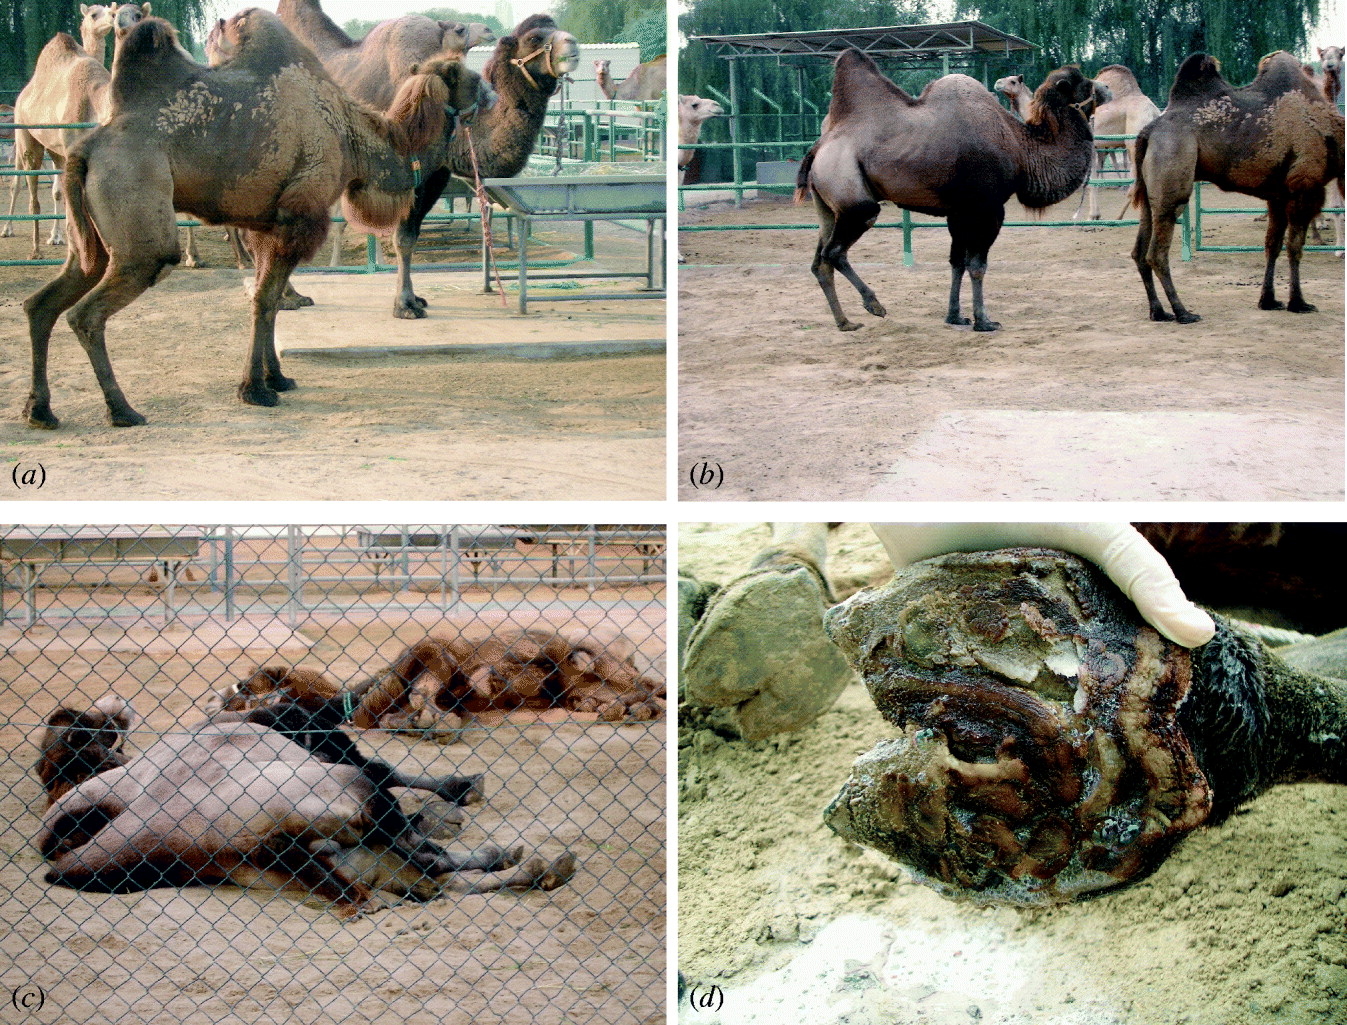 Differences In The Susceptibility Of Dromedary And Bactrian Camels To Foot And Mouth Disease Virus Epidemiology Infection Cambridge Core